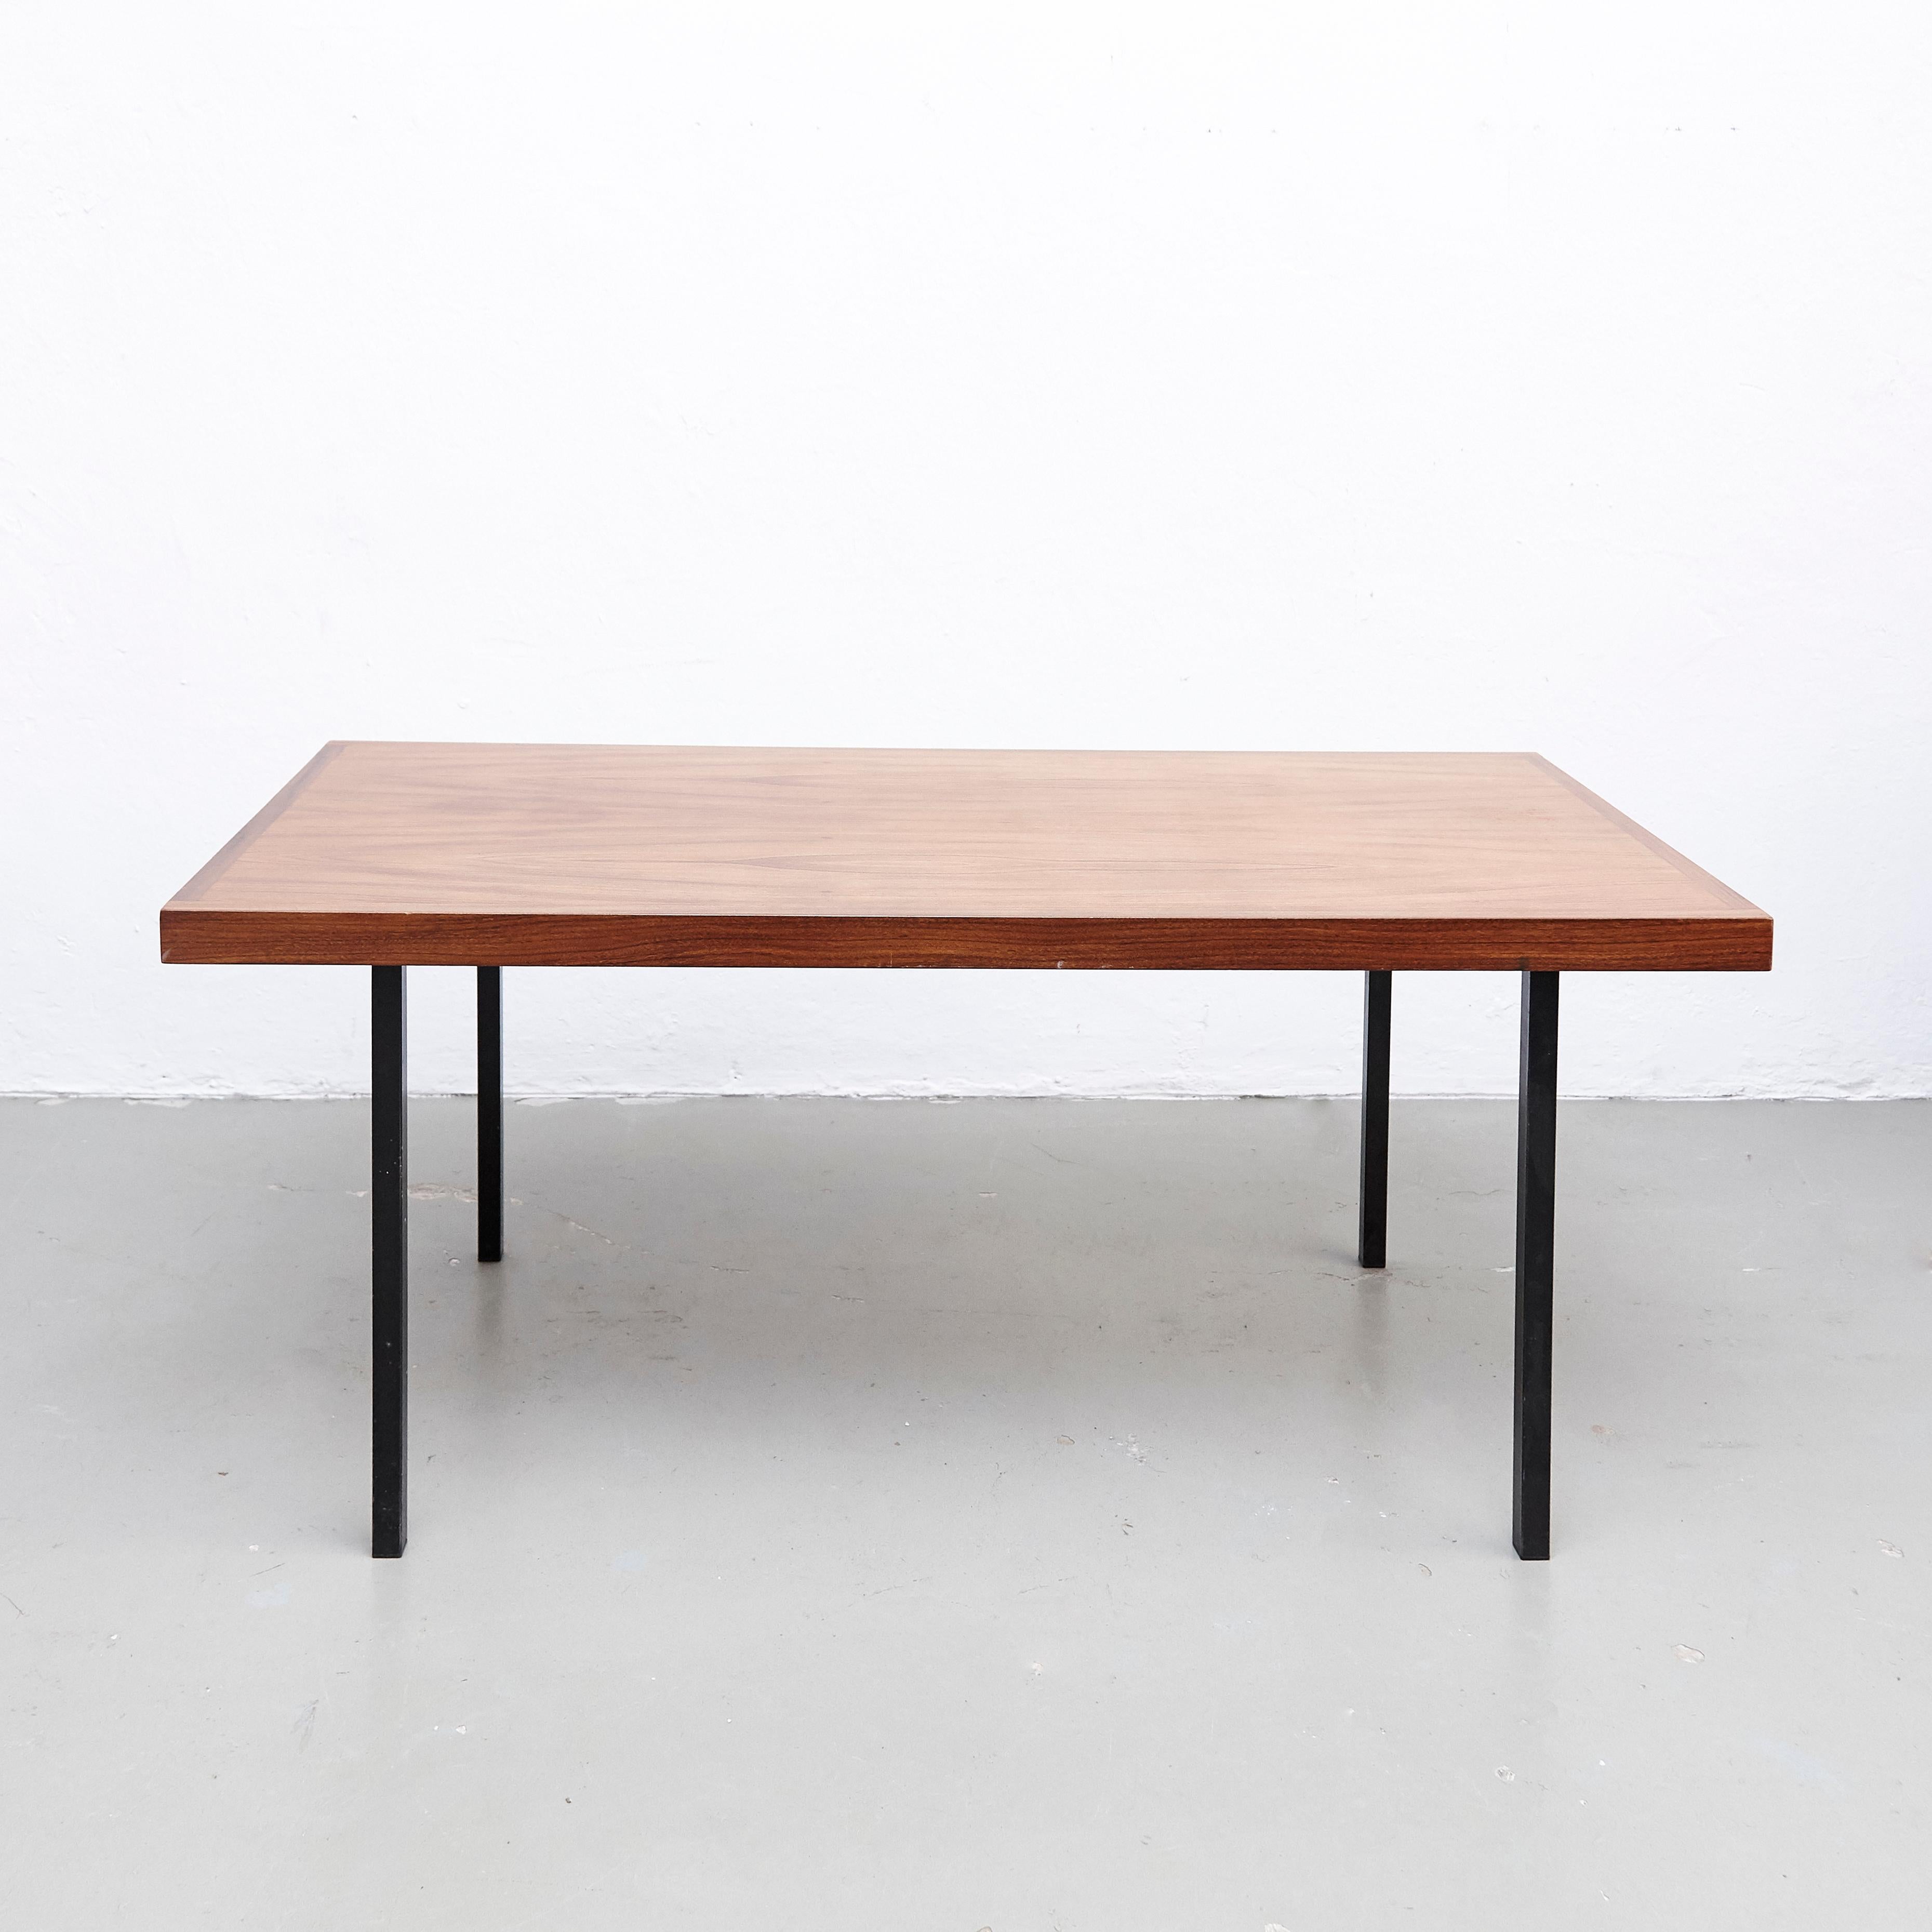 Kho Liang Le, Mid Century Modern, Wood Metal, Dining Table, circa 1950 (Niederländisch)